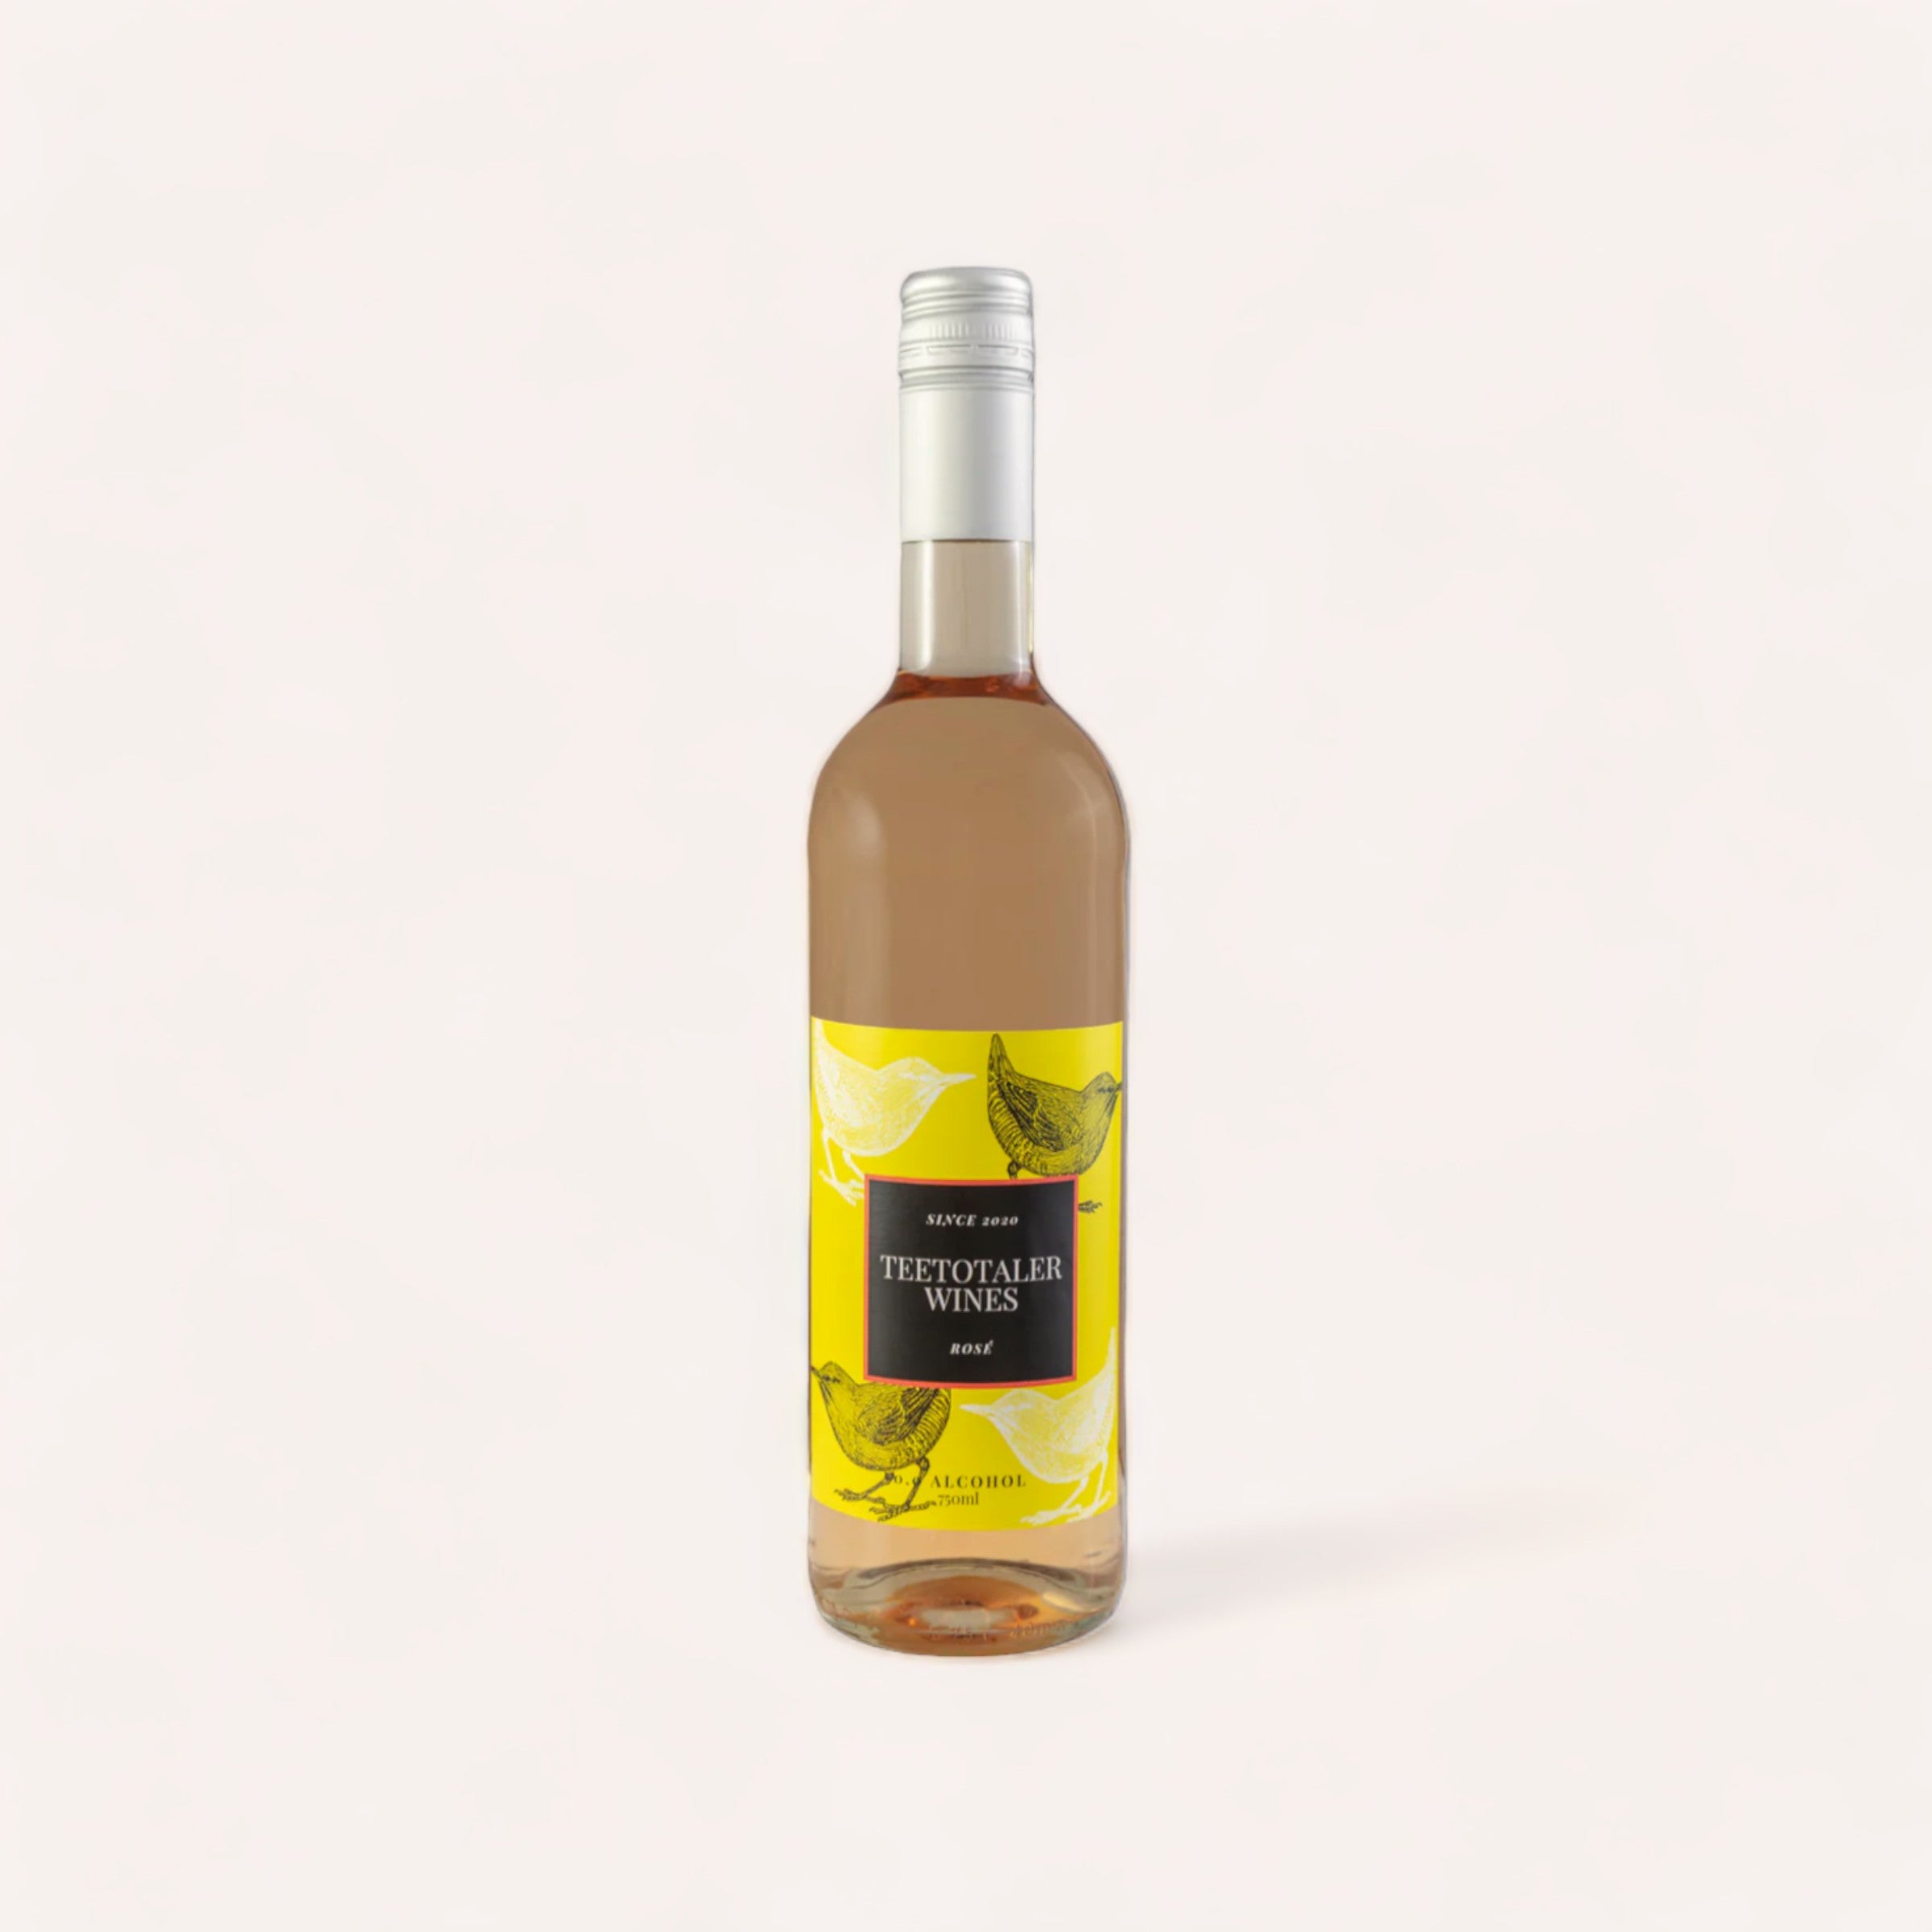 A bottle of Teetotaler Rose Wine with a yellow label featuring illustrations of birds, placed against a neutral background.